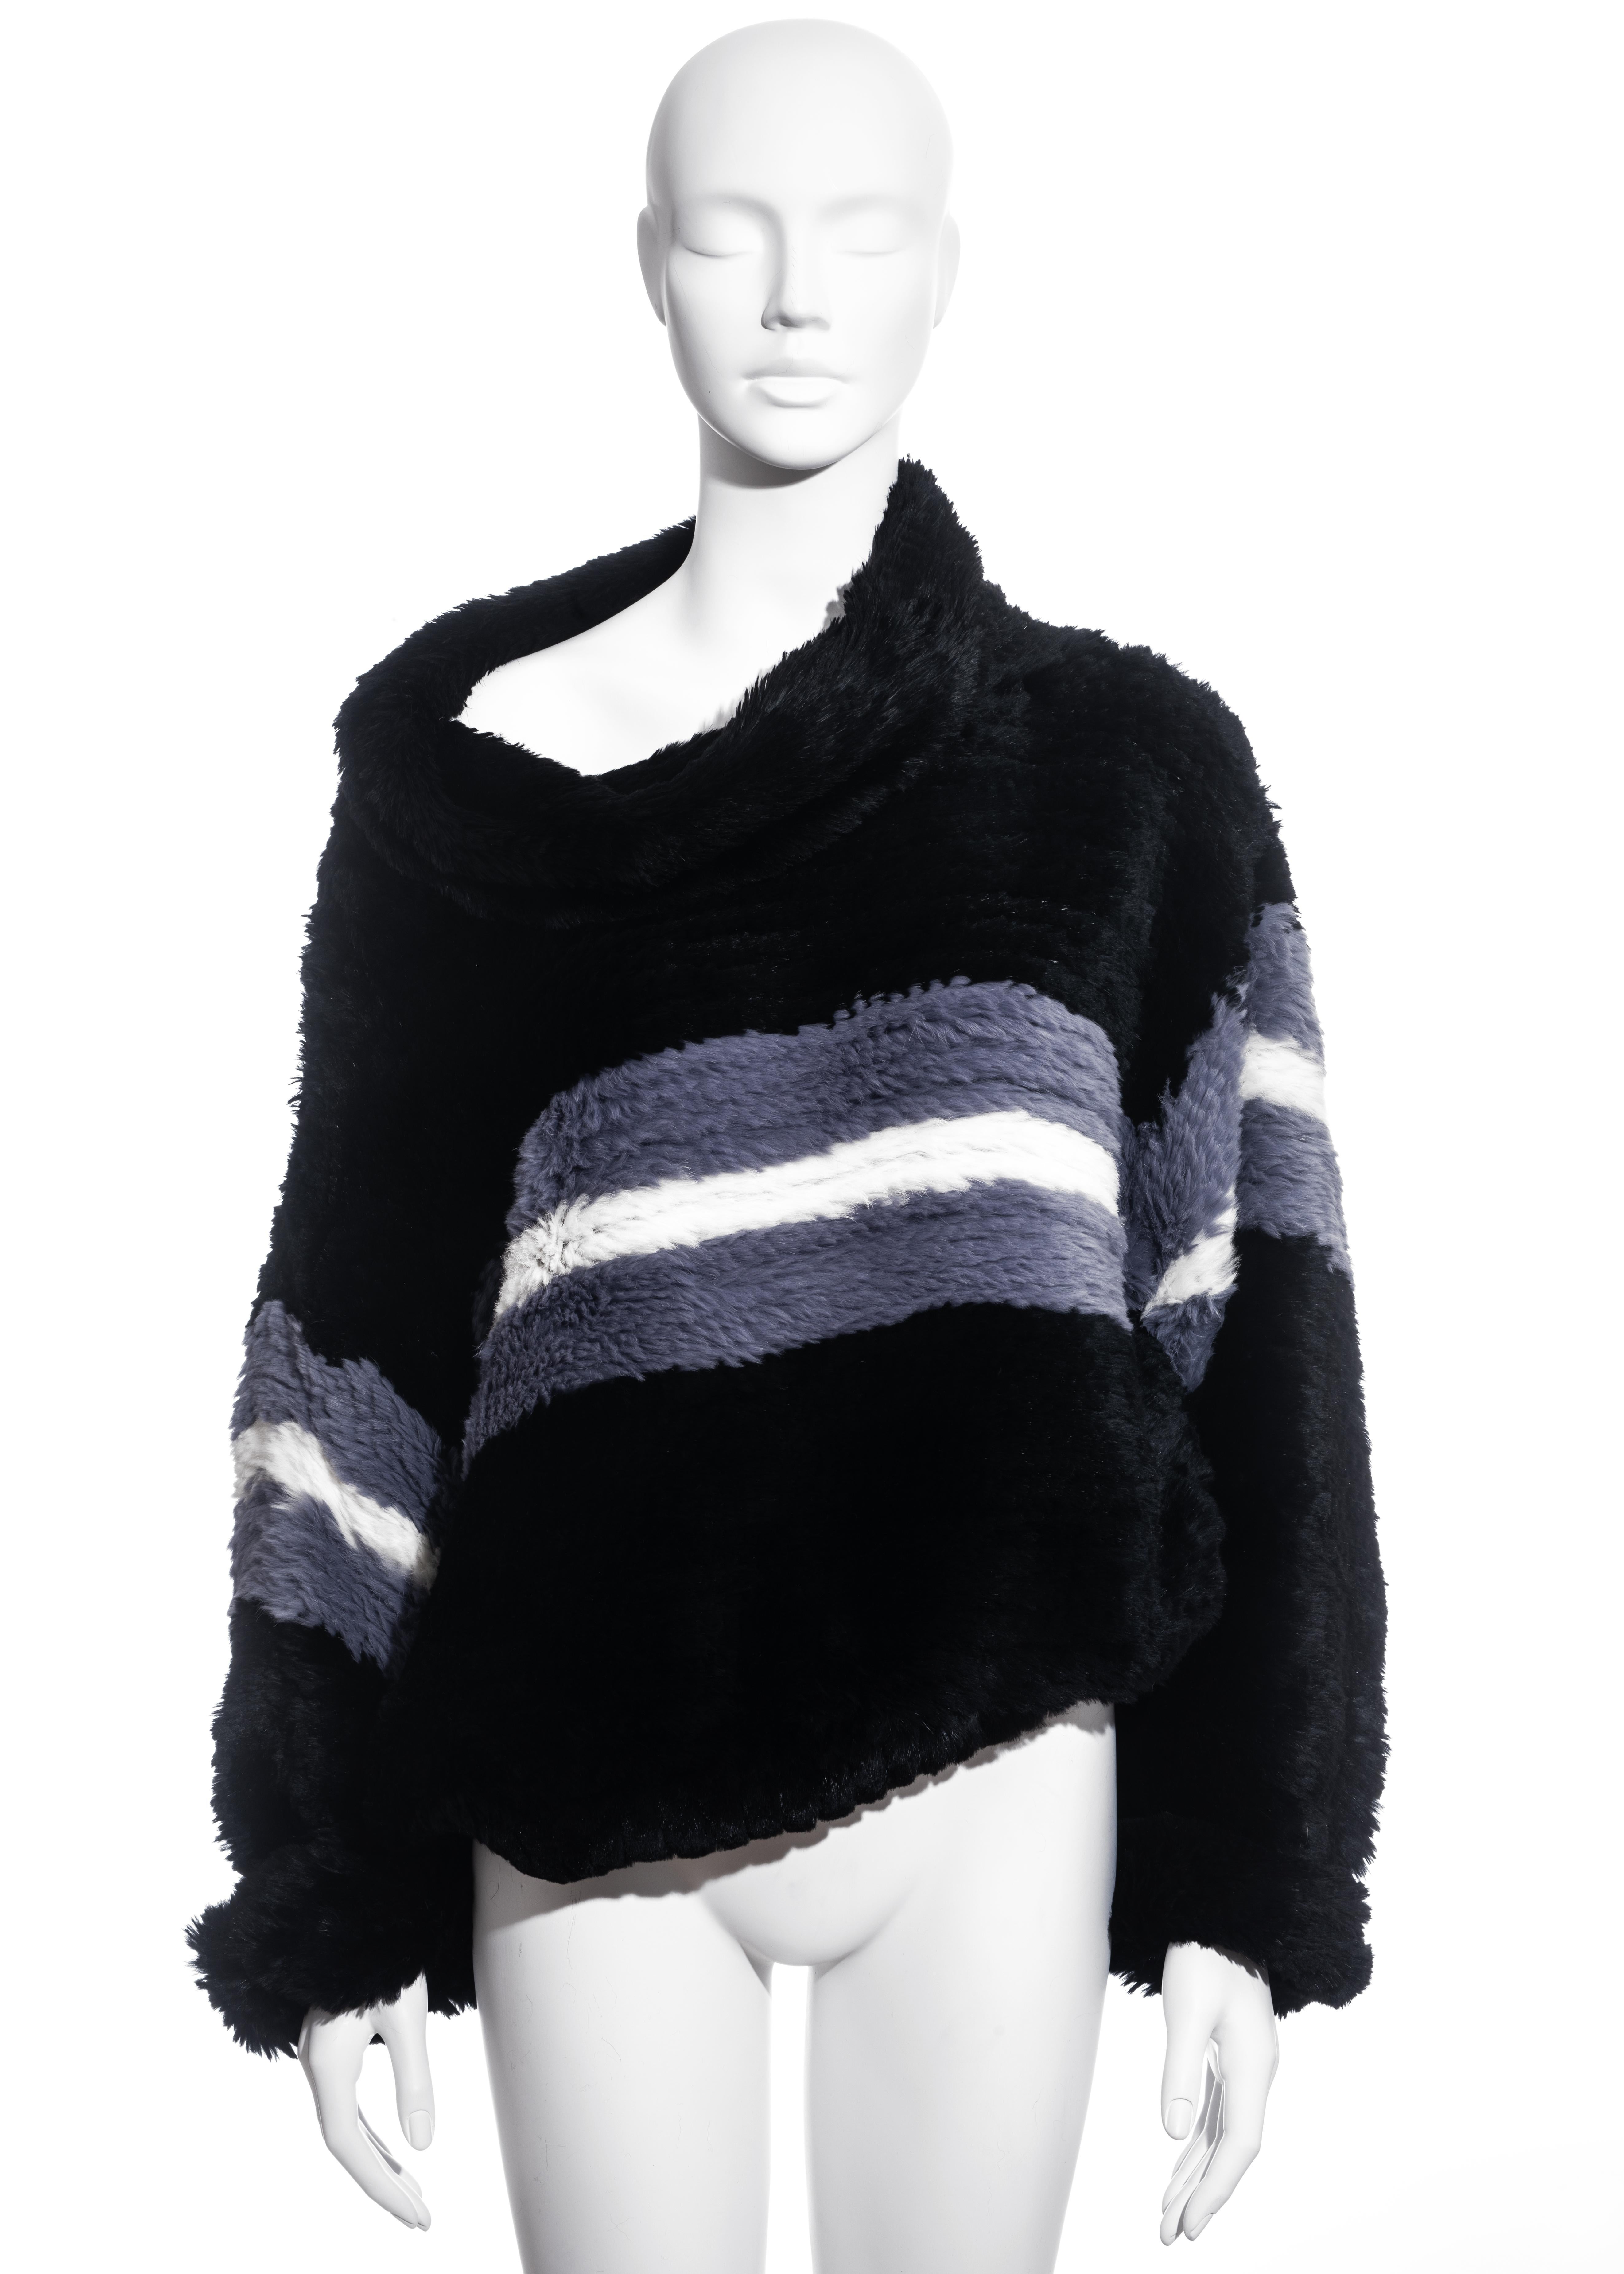 ▪ Jean Paul Gaultier black knitted fur sweater
▪ Rabbit fur
▪ White and grey striped detail
▪ Oversized fit 
▪ Wide turtle neck
▪ Size Large
▪ Fall-Winter 2003